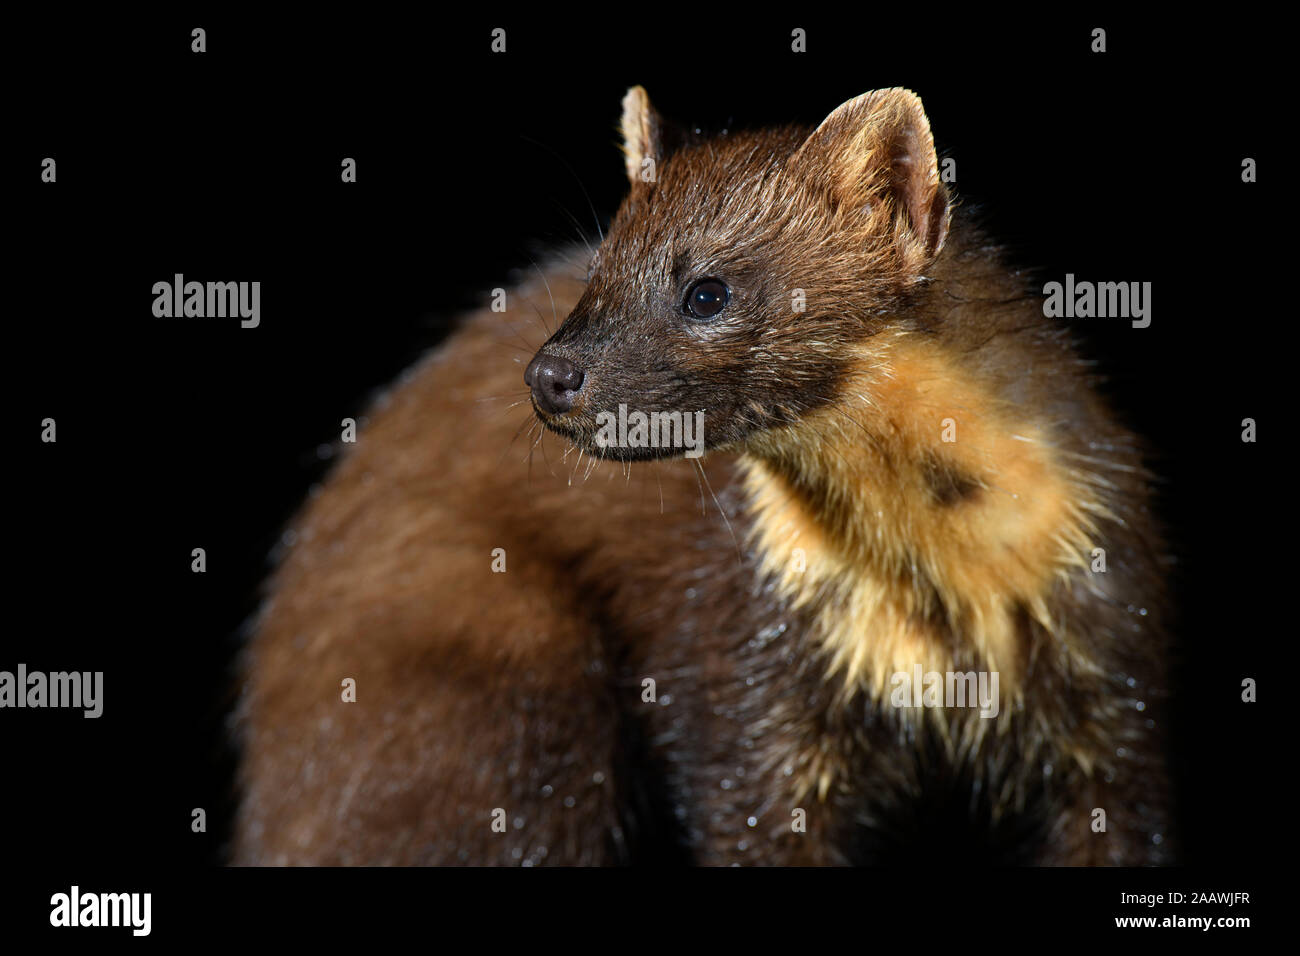 Close-up of pine marten against black background Stock Photo